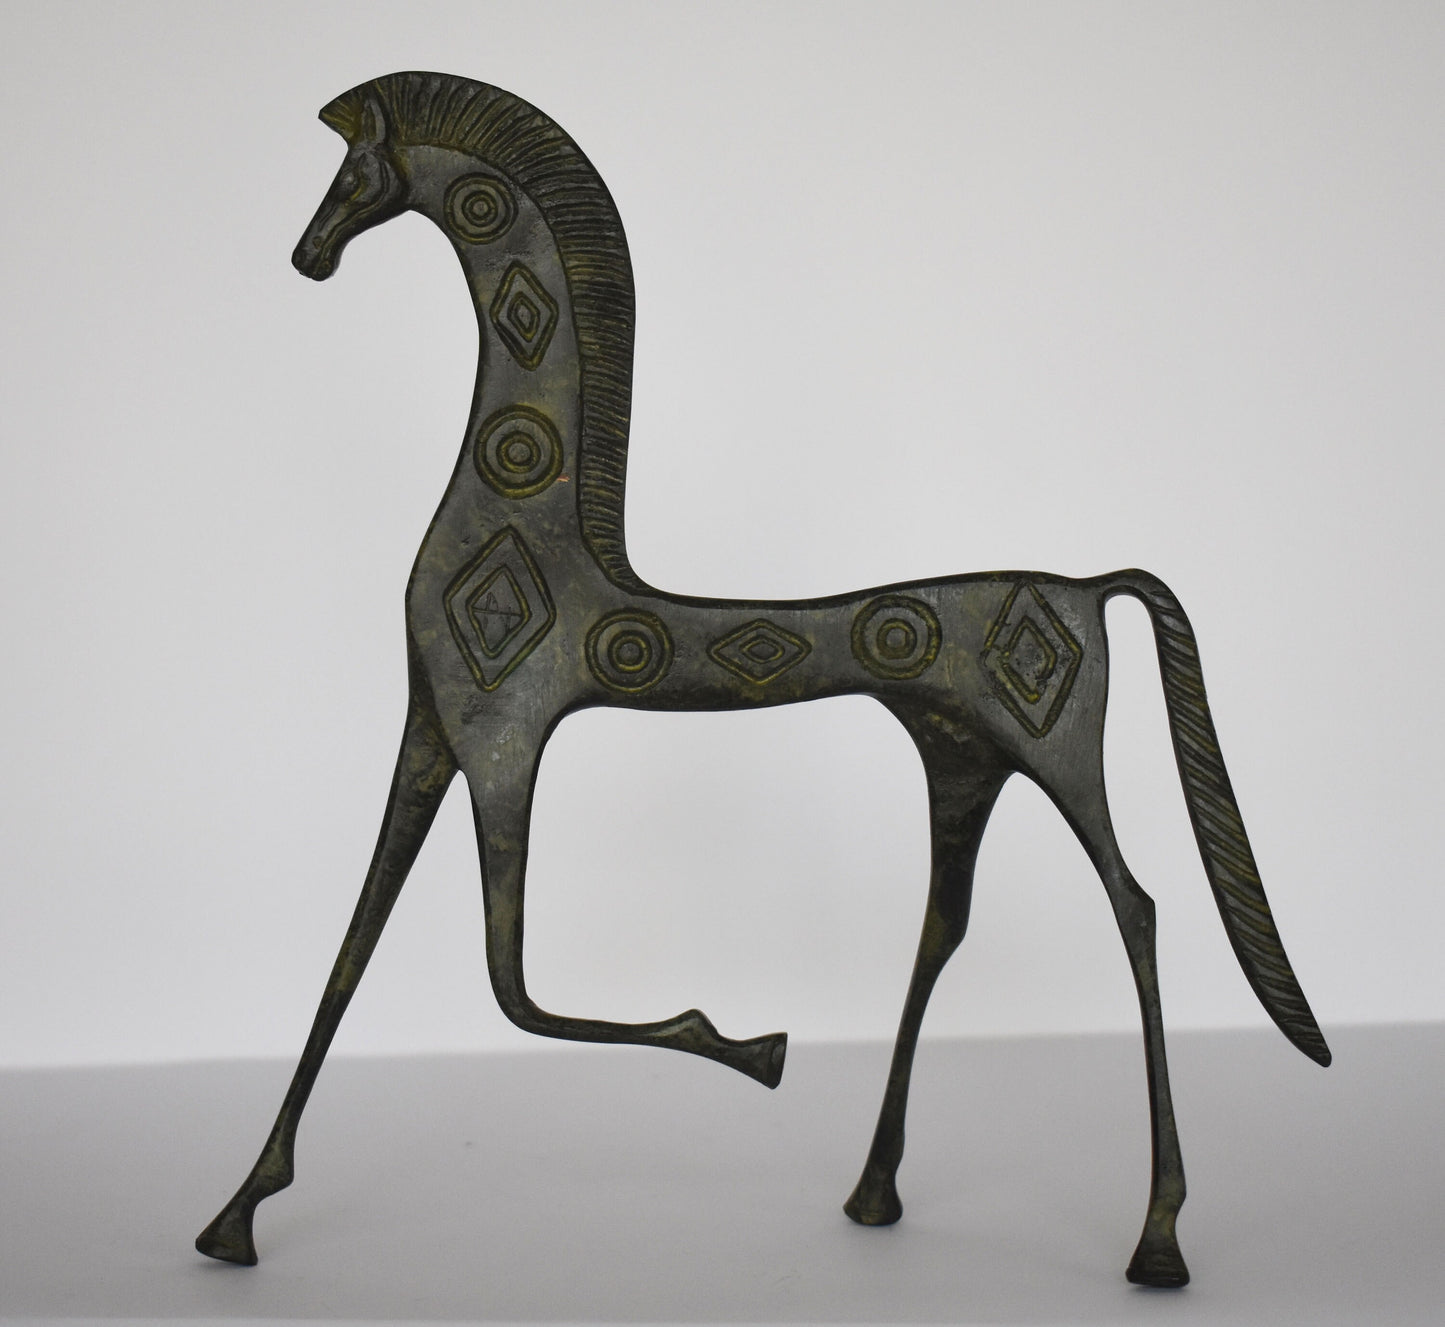 Ancient Greek Horse - History - pure Bronze Sculpture - Symbol of Wealth and Prosperity